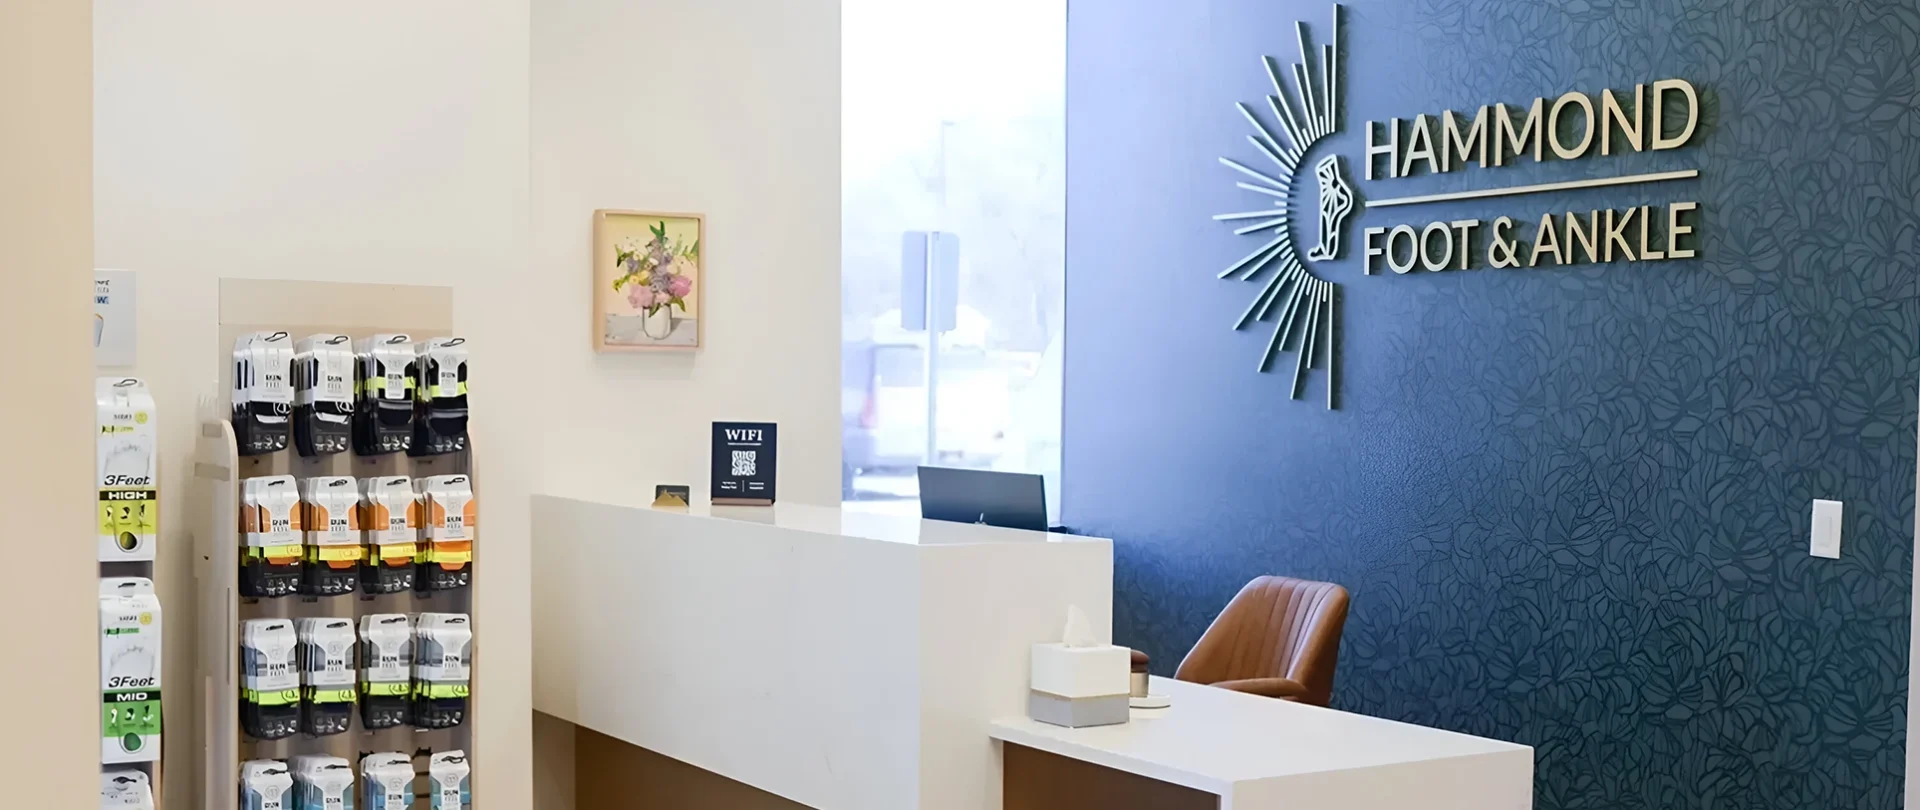 A white reception desk with a clock on the wall.